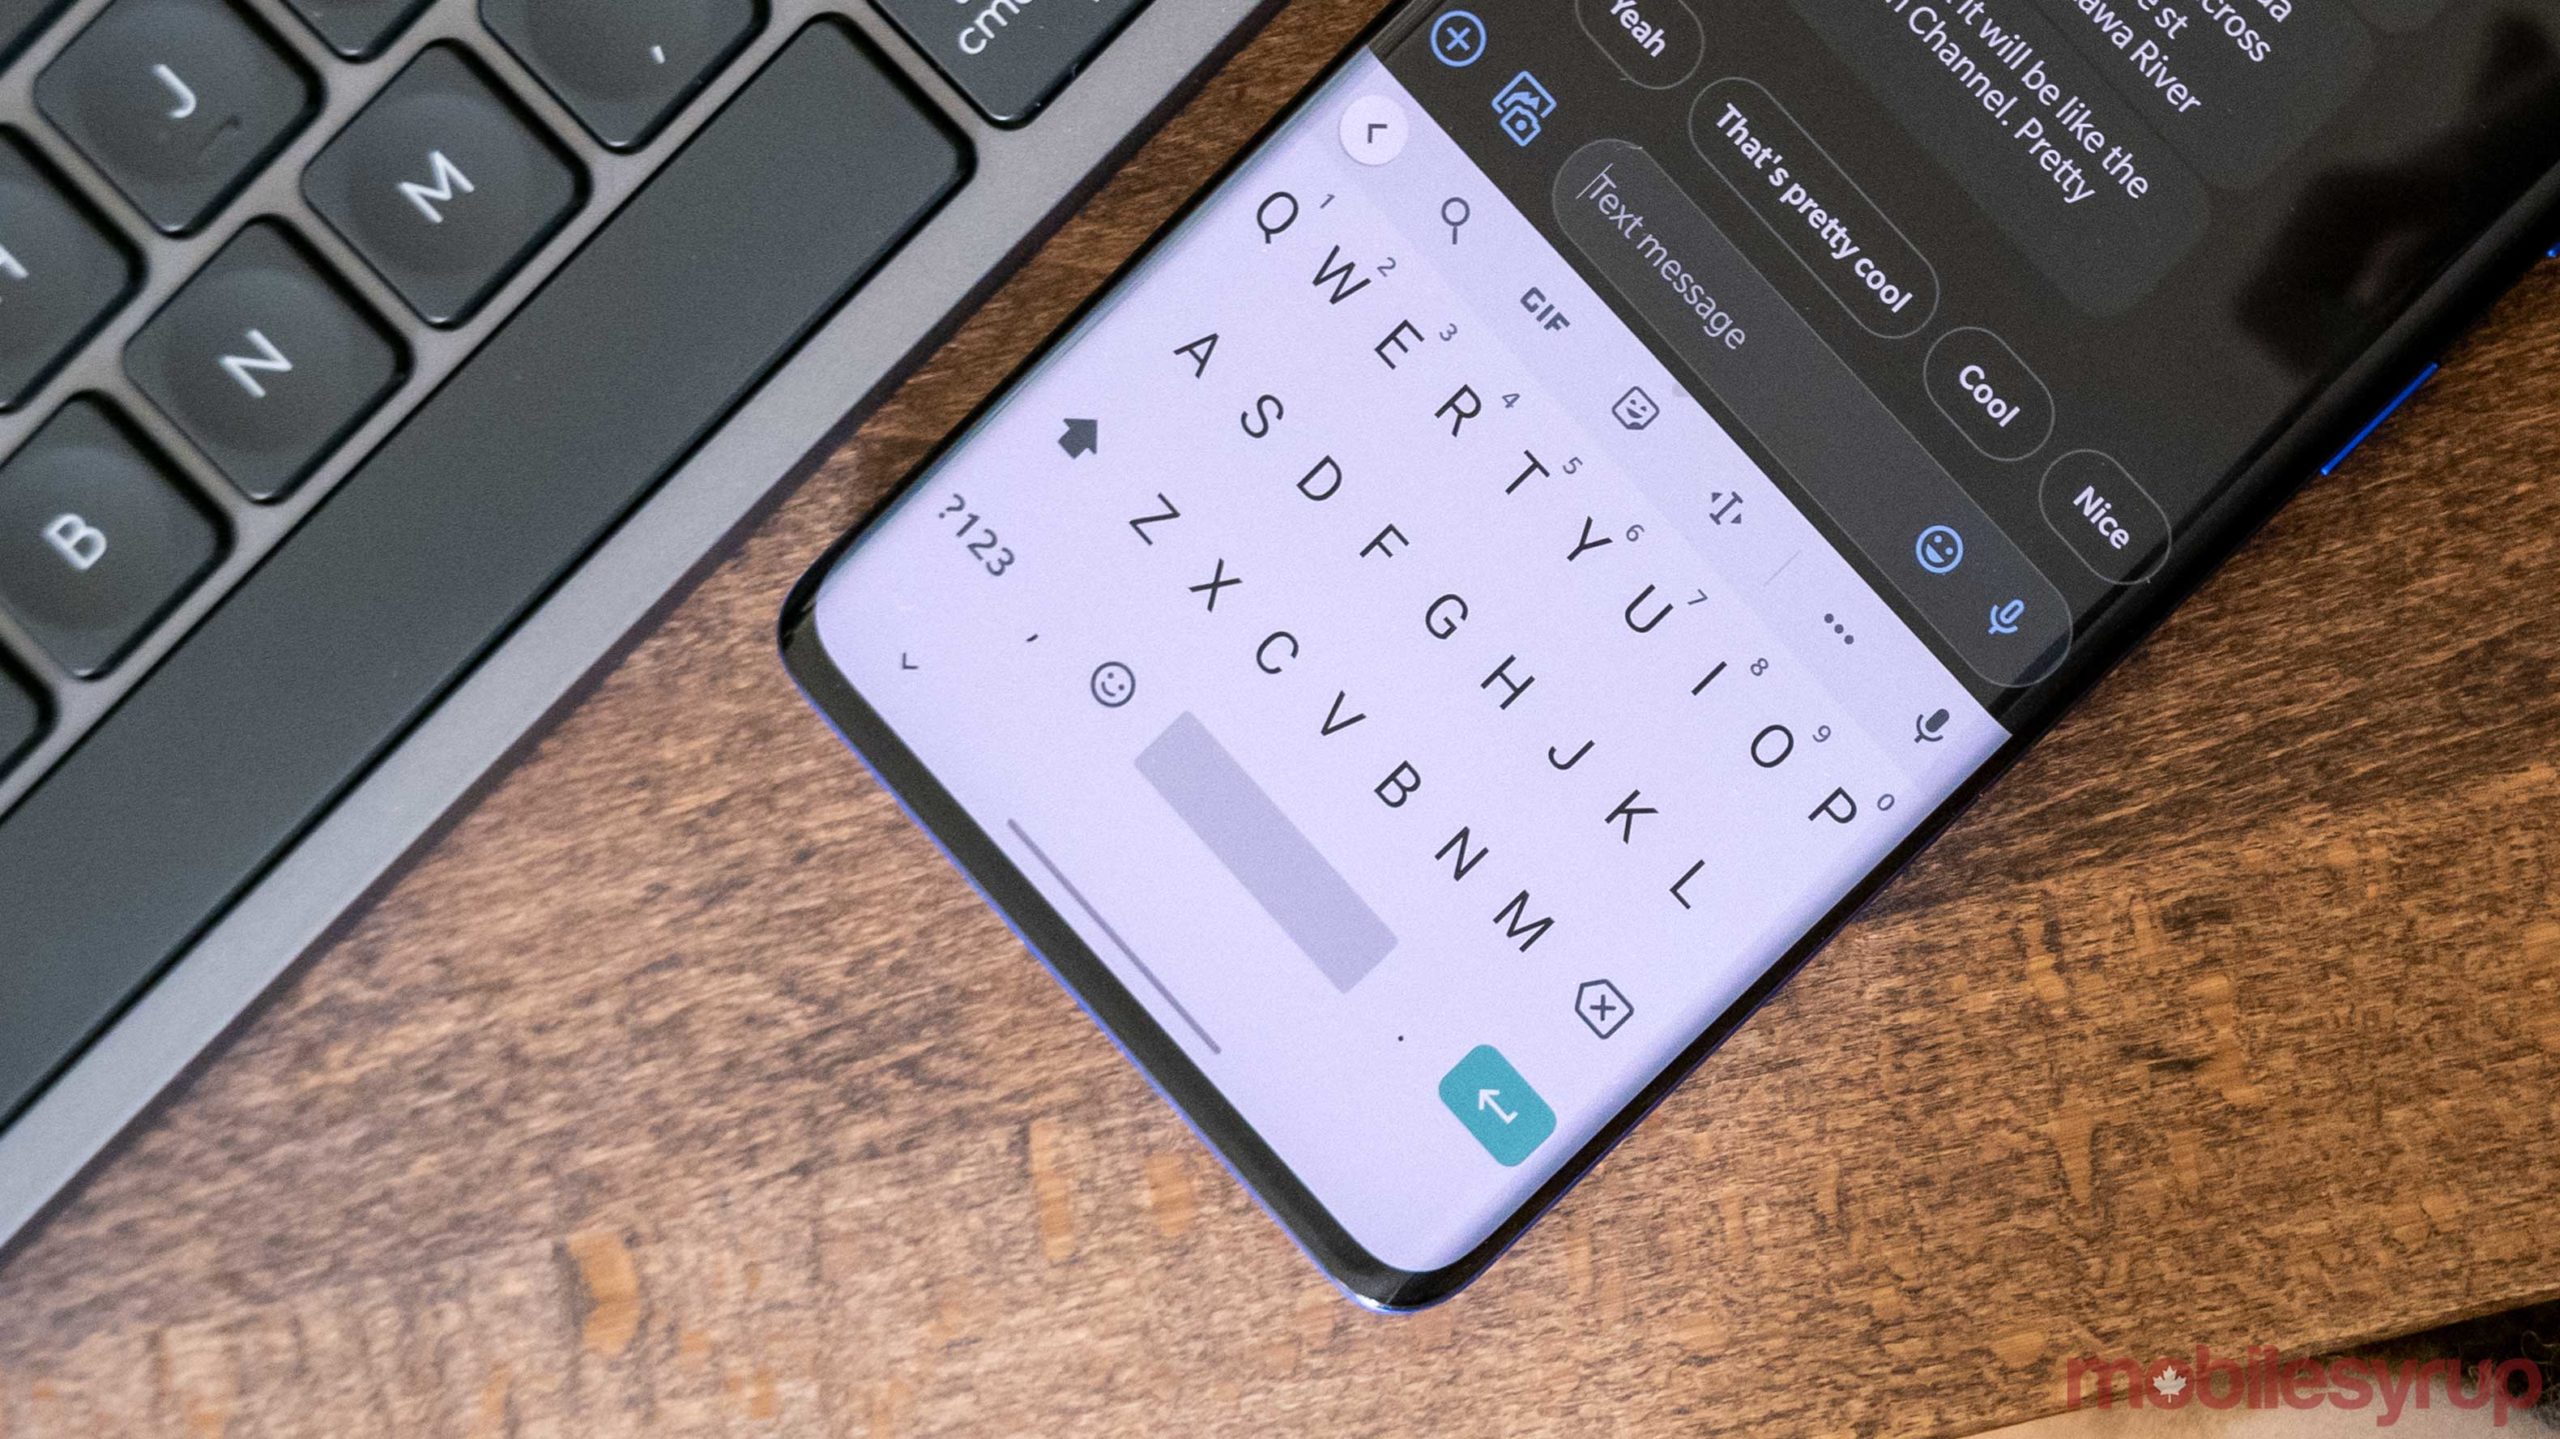 Gboard update improves voice typing with Google Assistant